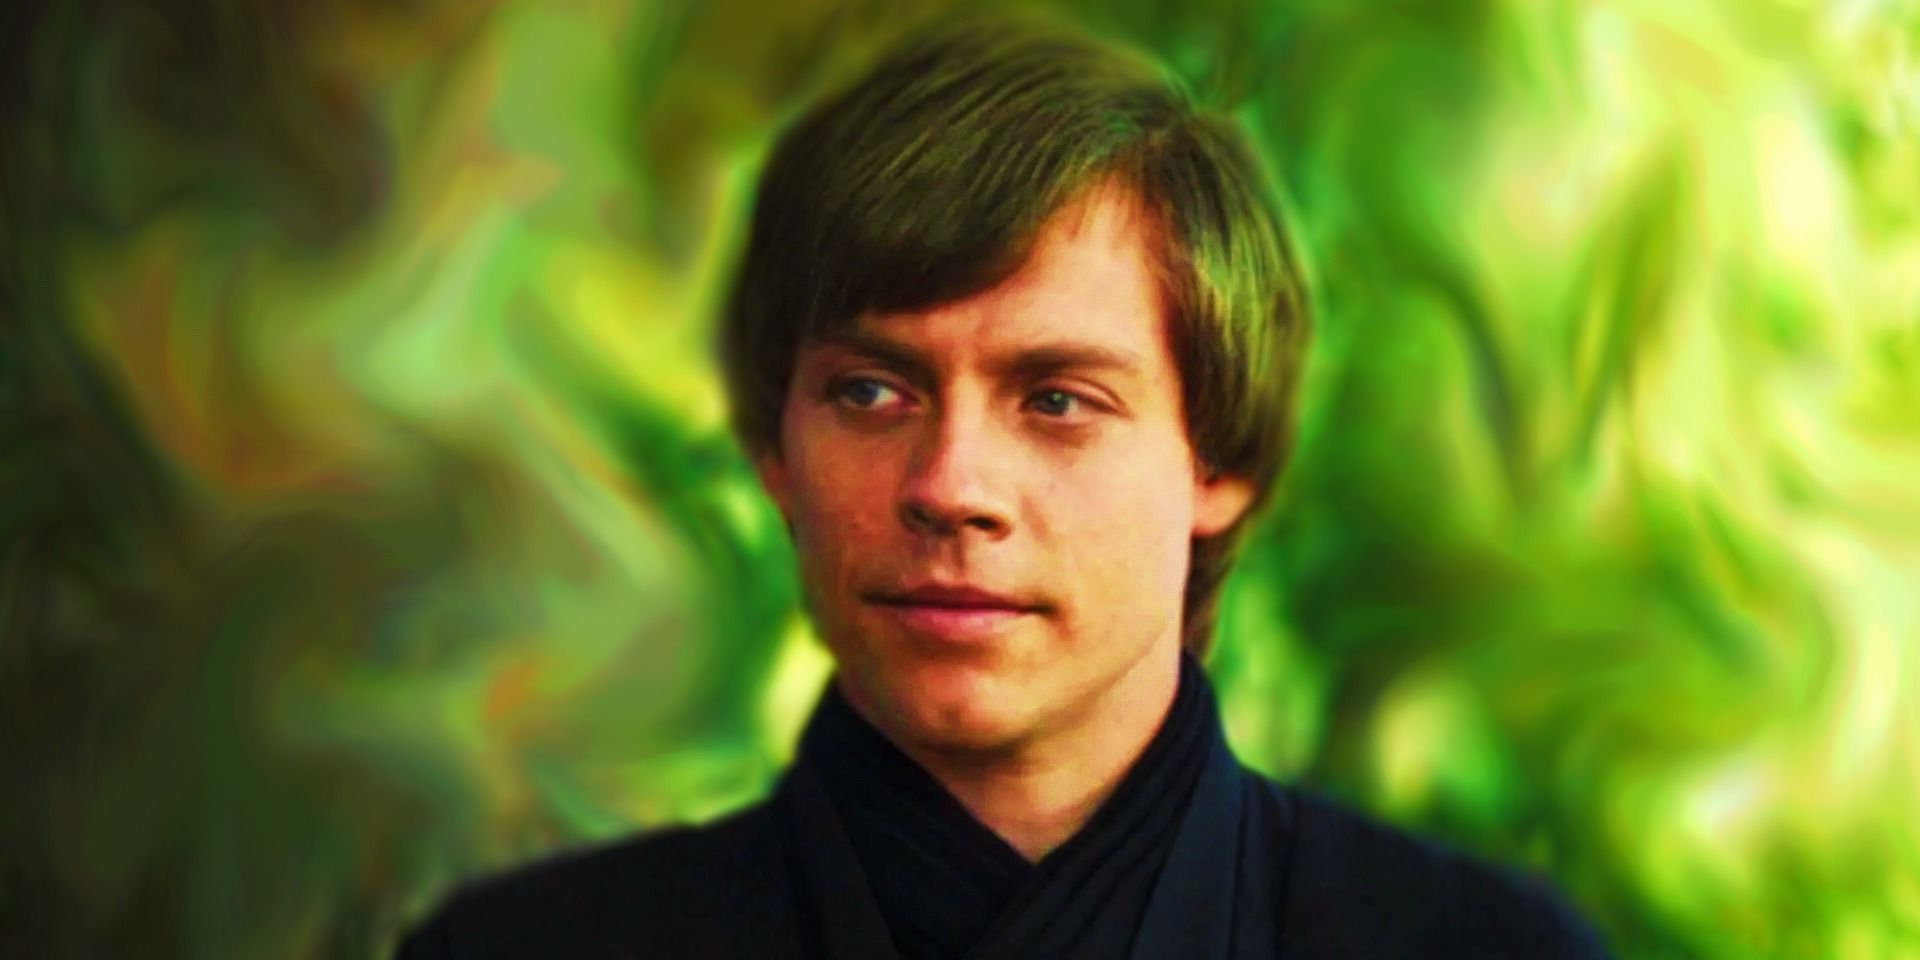 Luke Skywalker looking to the side Book of Boba Fett with a vibrant distorted green background